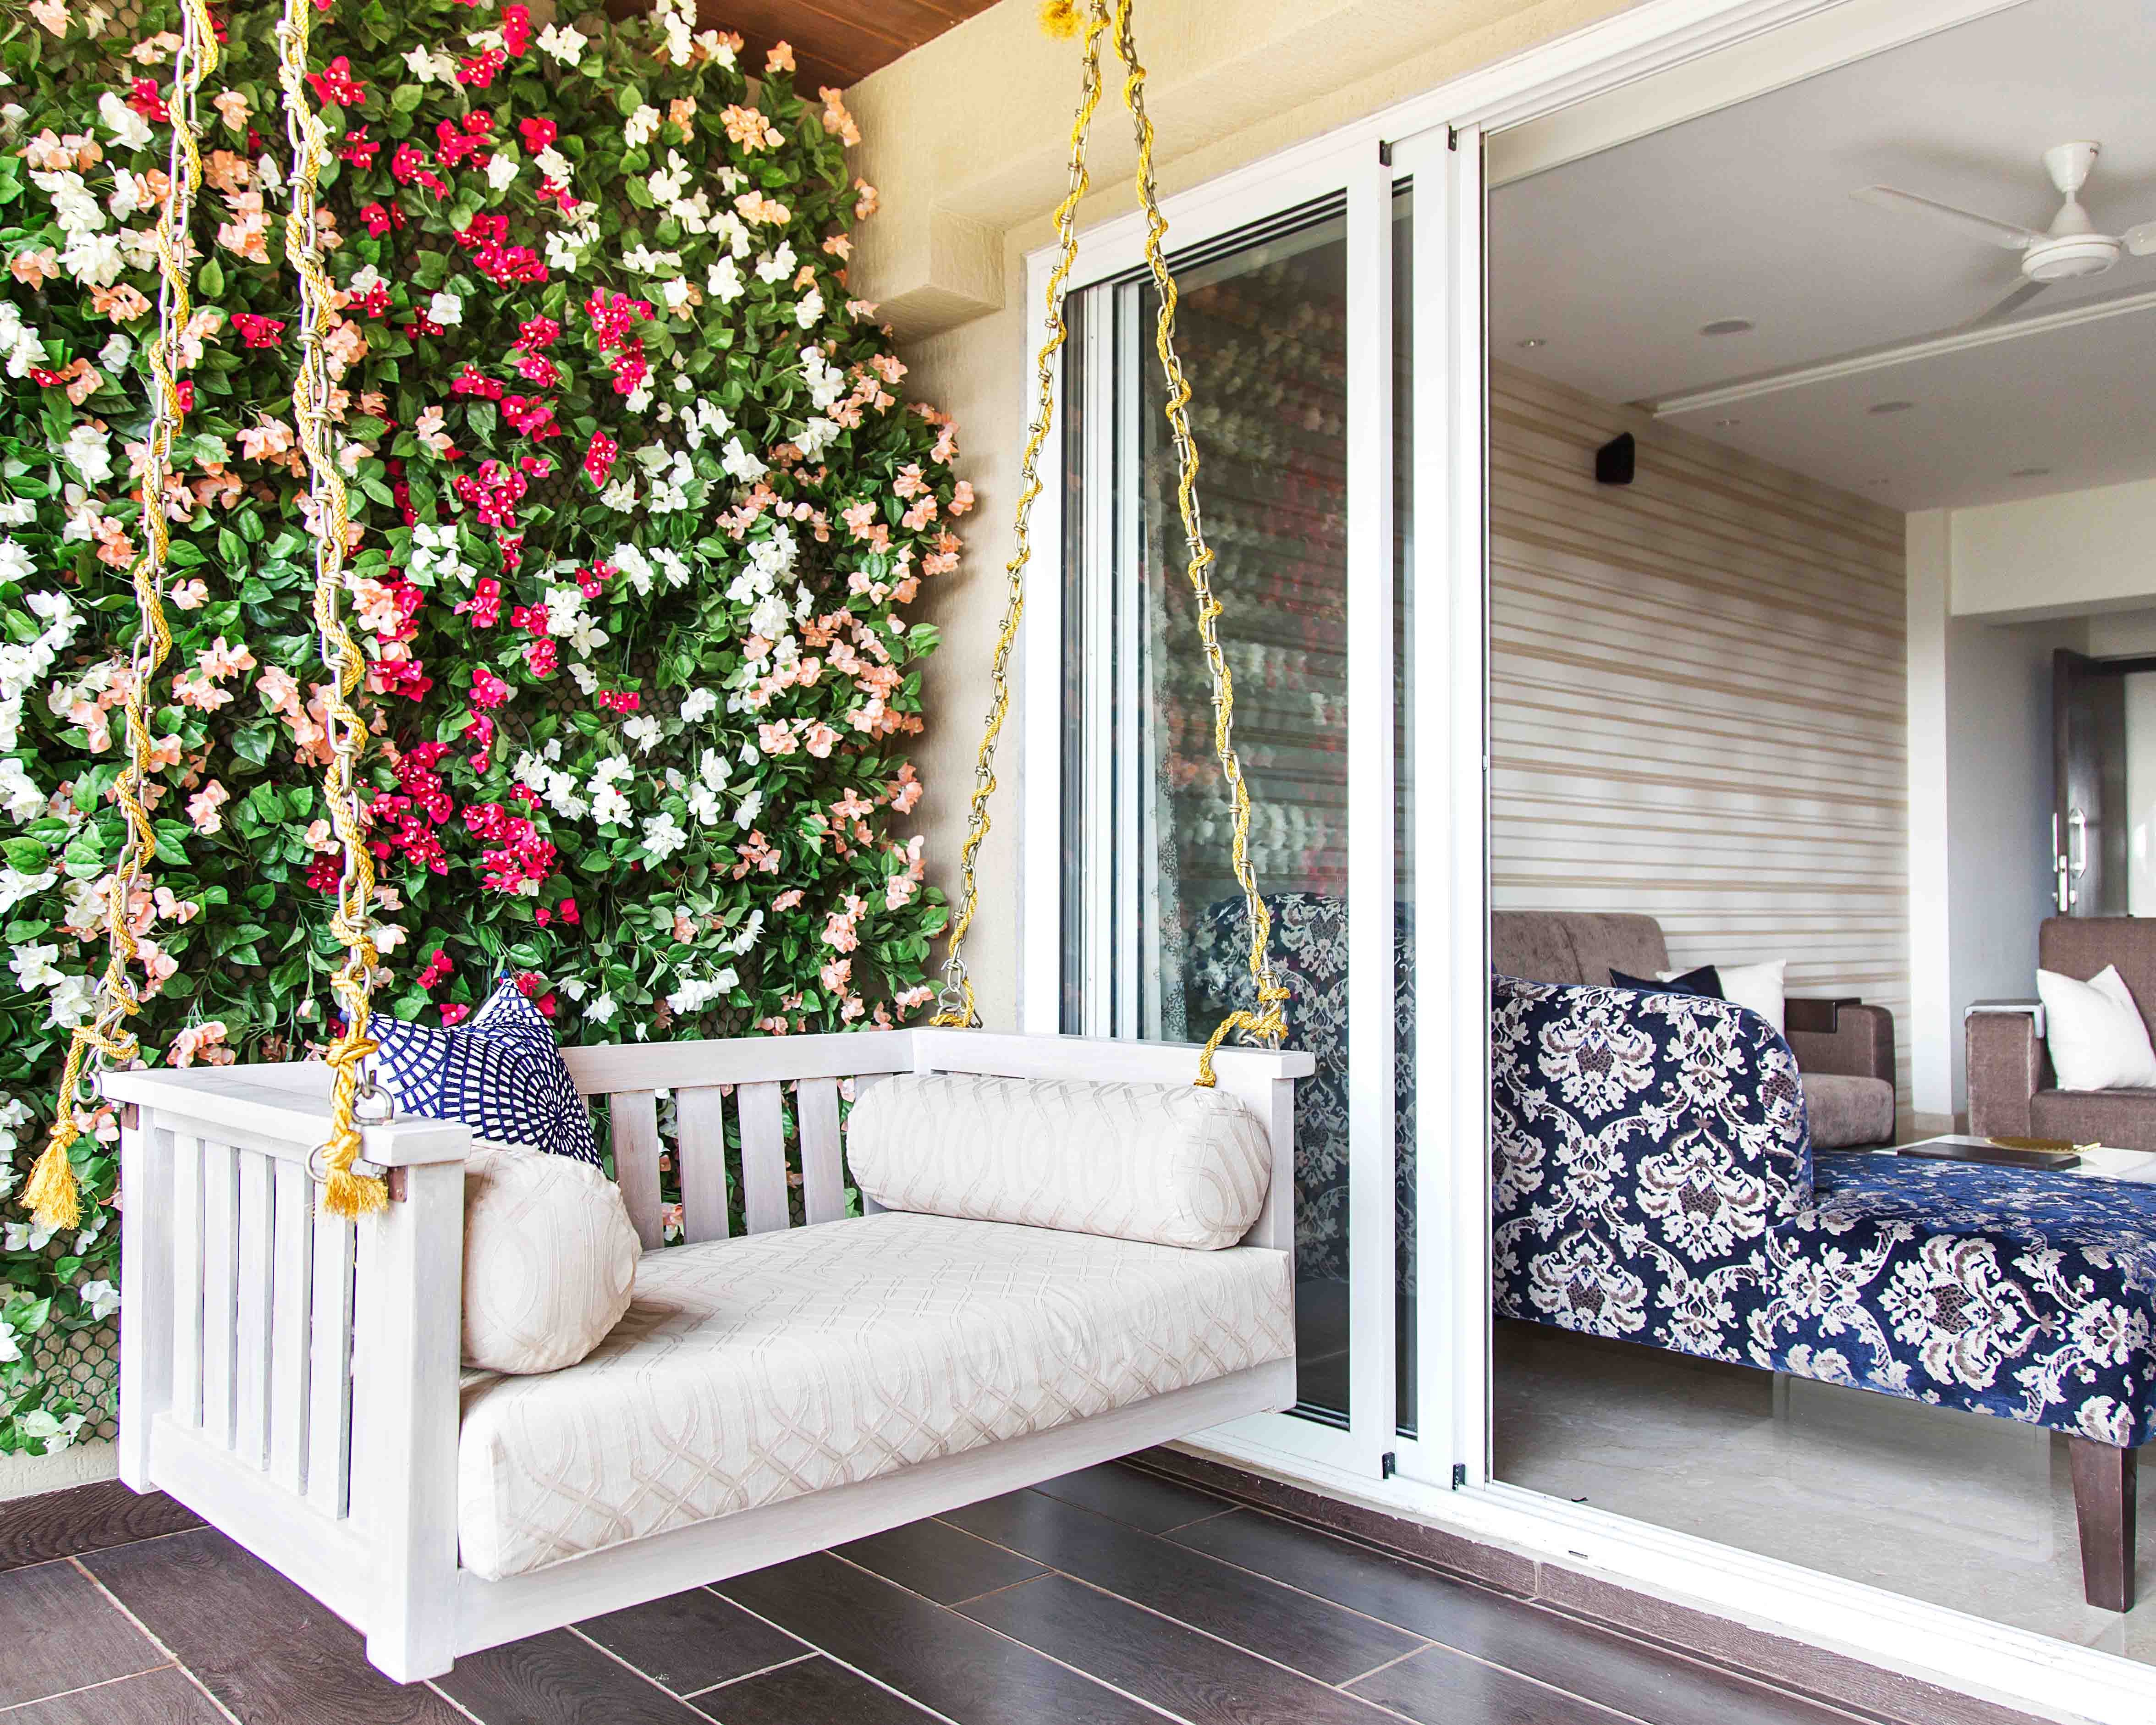 Modern Balcony Design with Wall Planter and White Swing